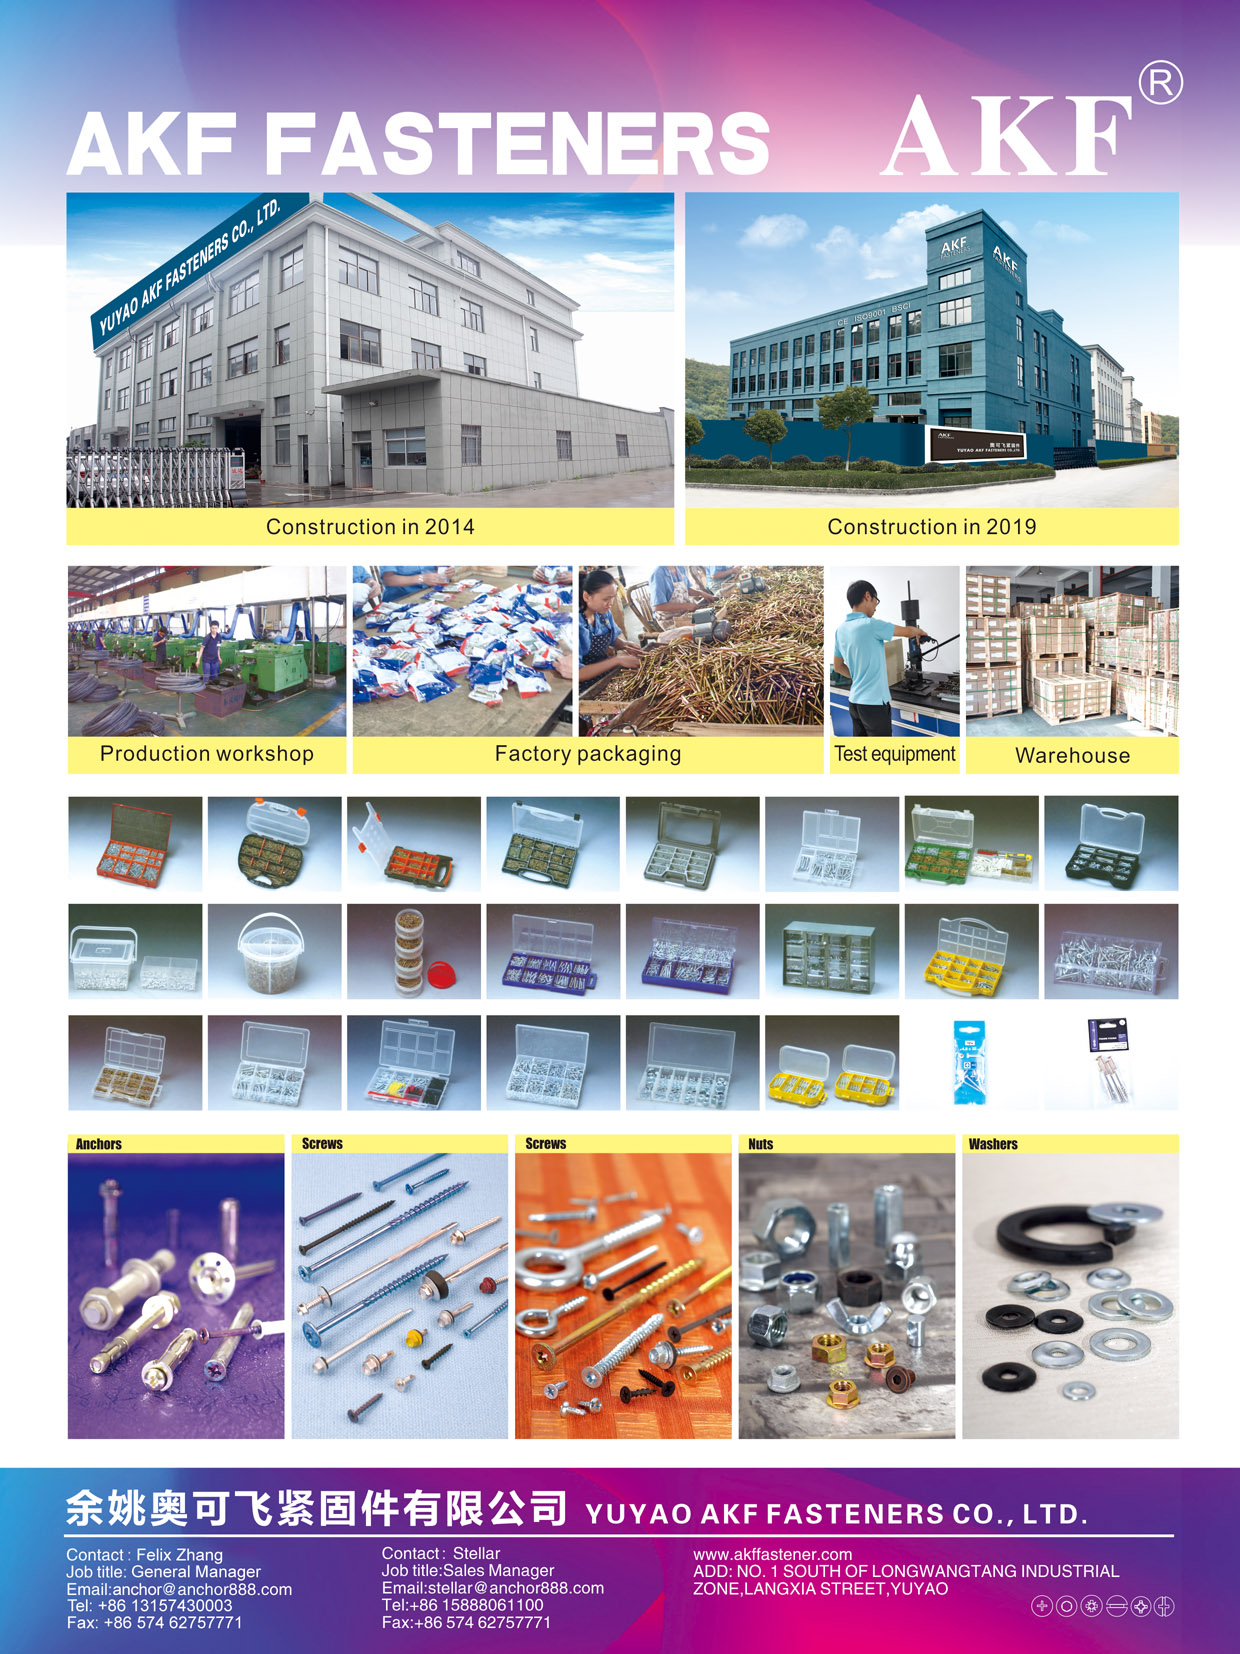 YUYAO AKF FASTENERS CO., LTD. , Anchors, Screws, Nuts, Washers